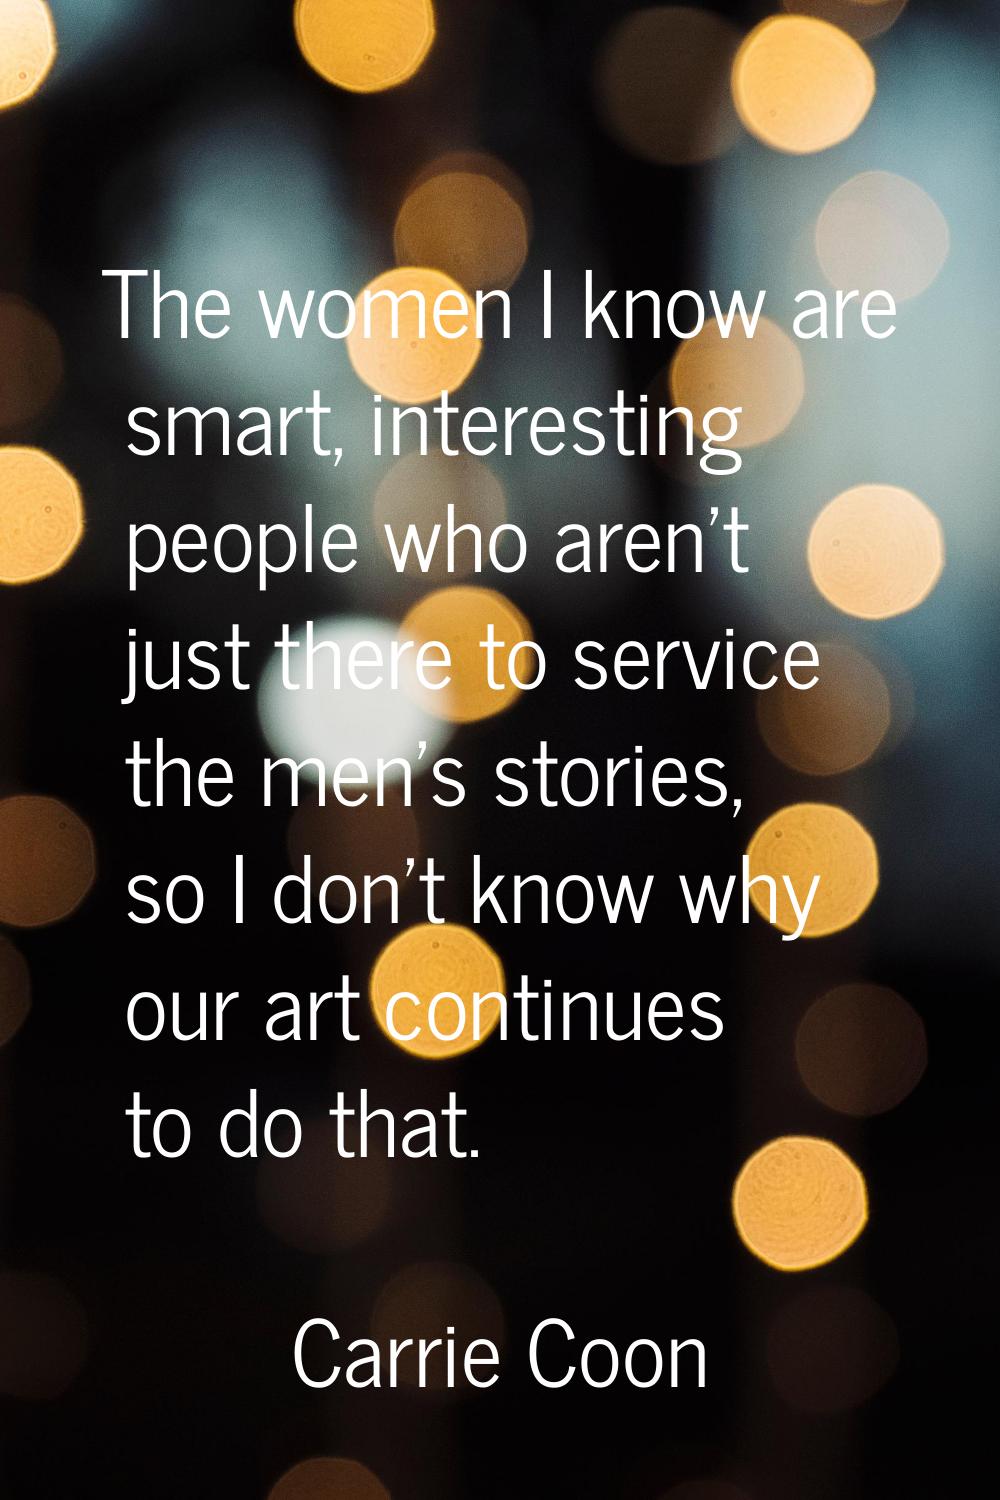 The women I know are smart, interesting people who aren't just there to service the men's stories, 